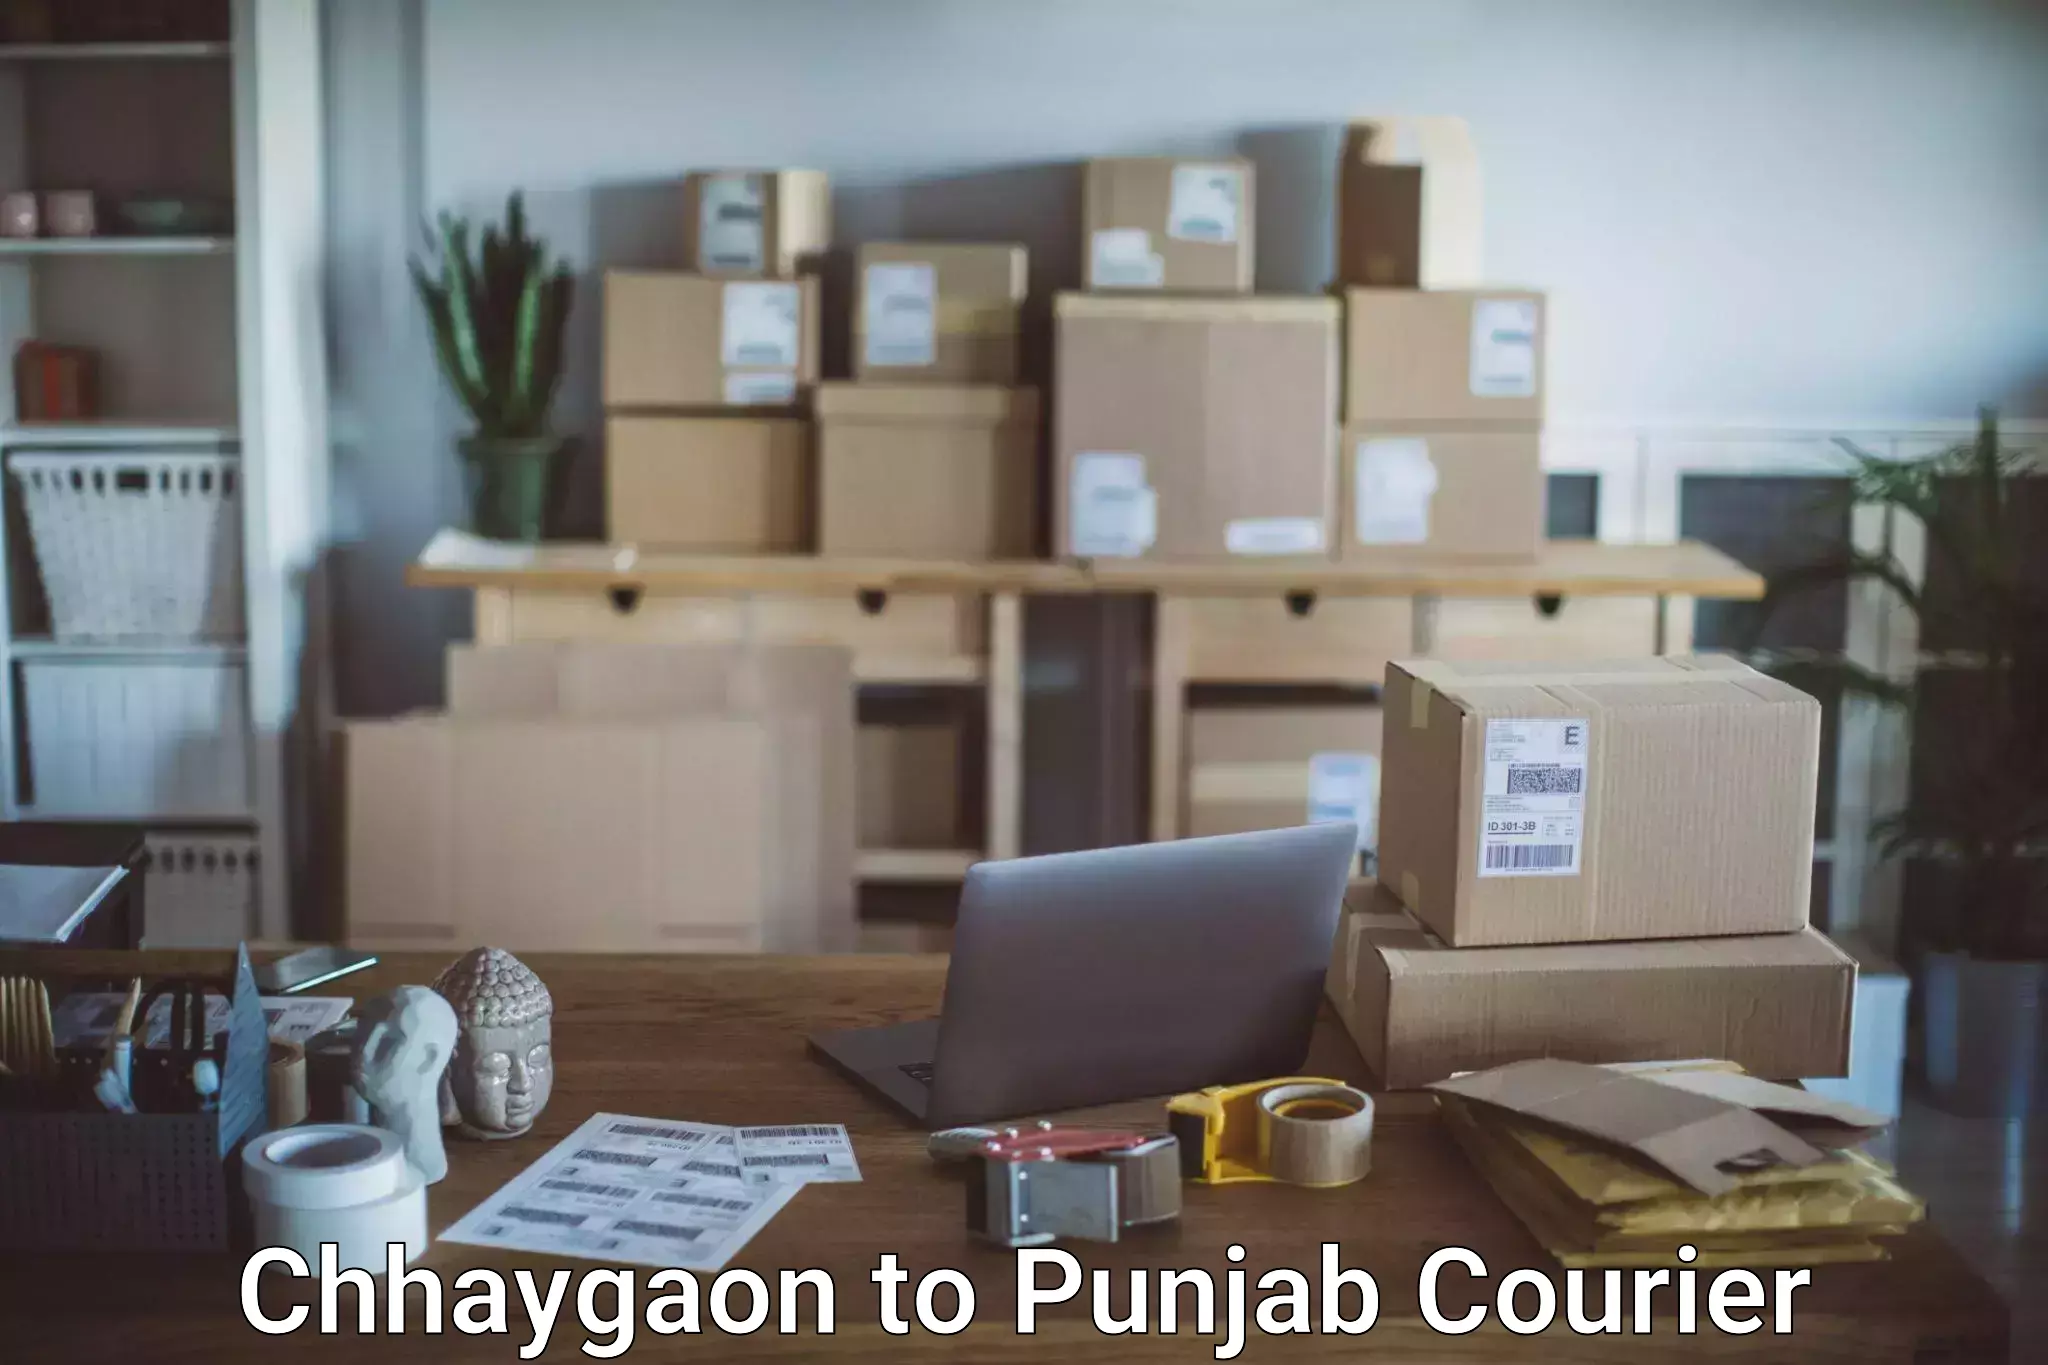 Luggage transport consultancy Chhaygaon to Ludhiana